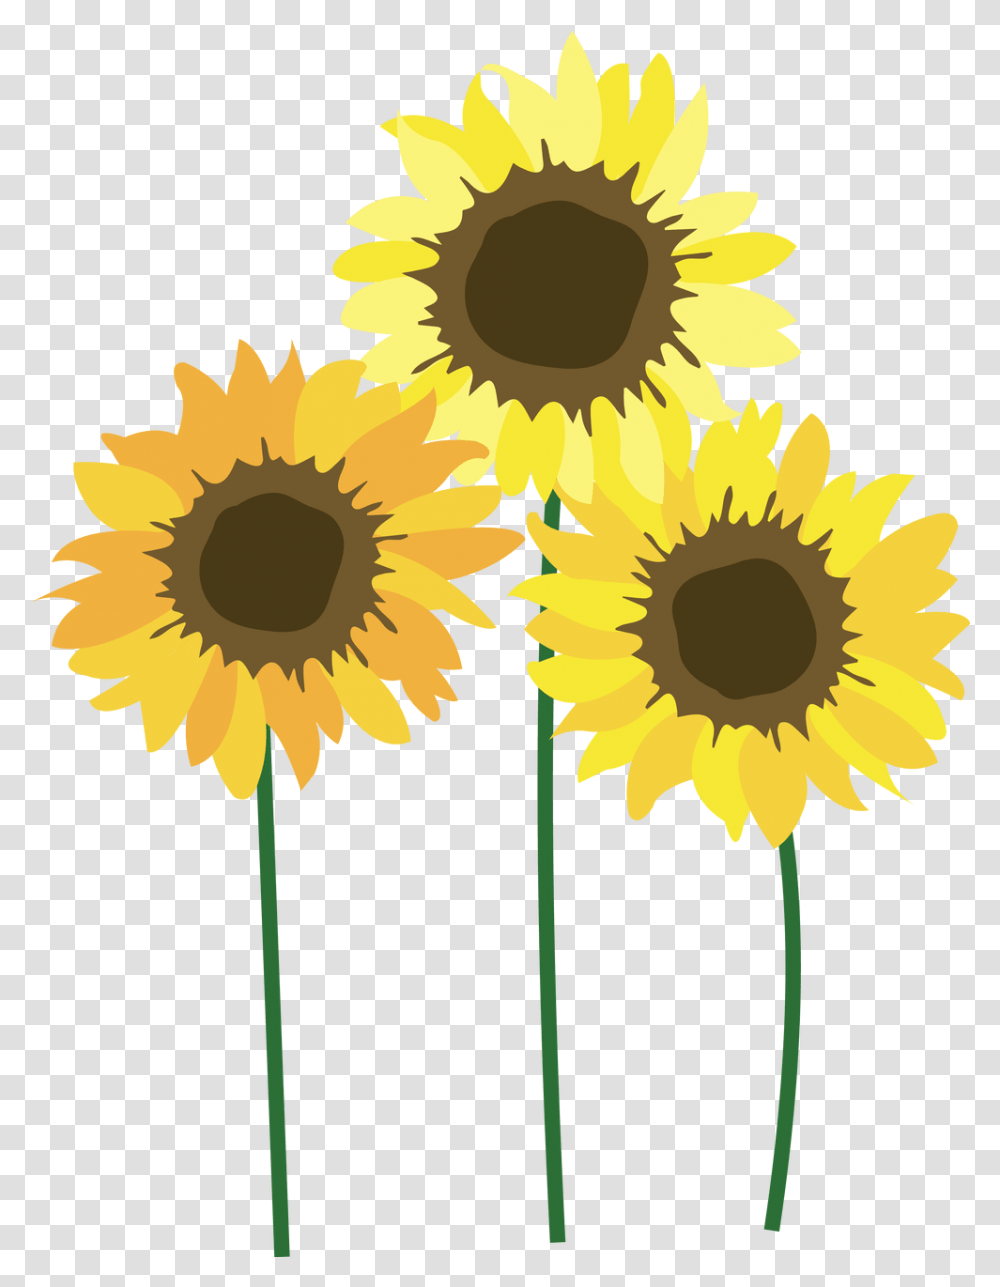 Sunflowers Free Clipart Background Sunflower, Plant, Blossom, Daisy, Daisies Transparent Png